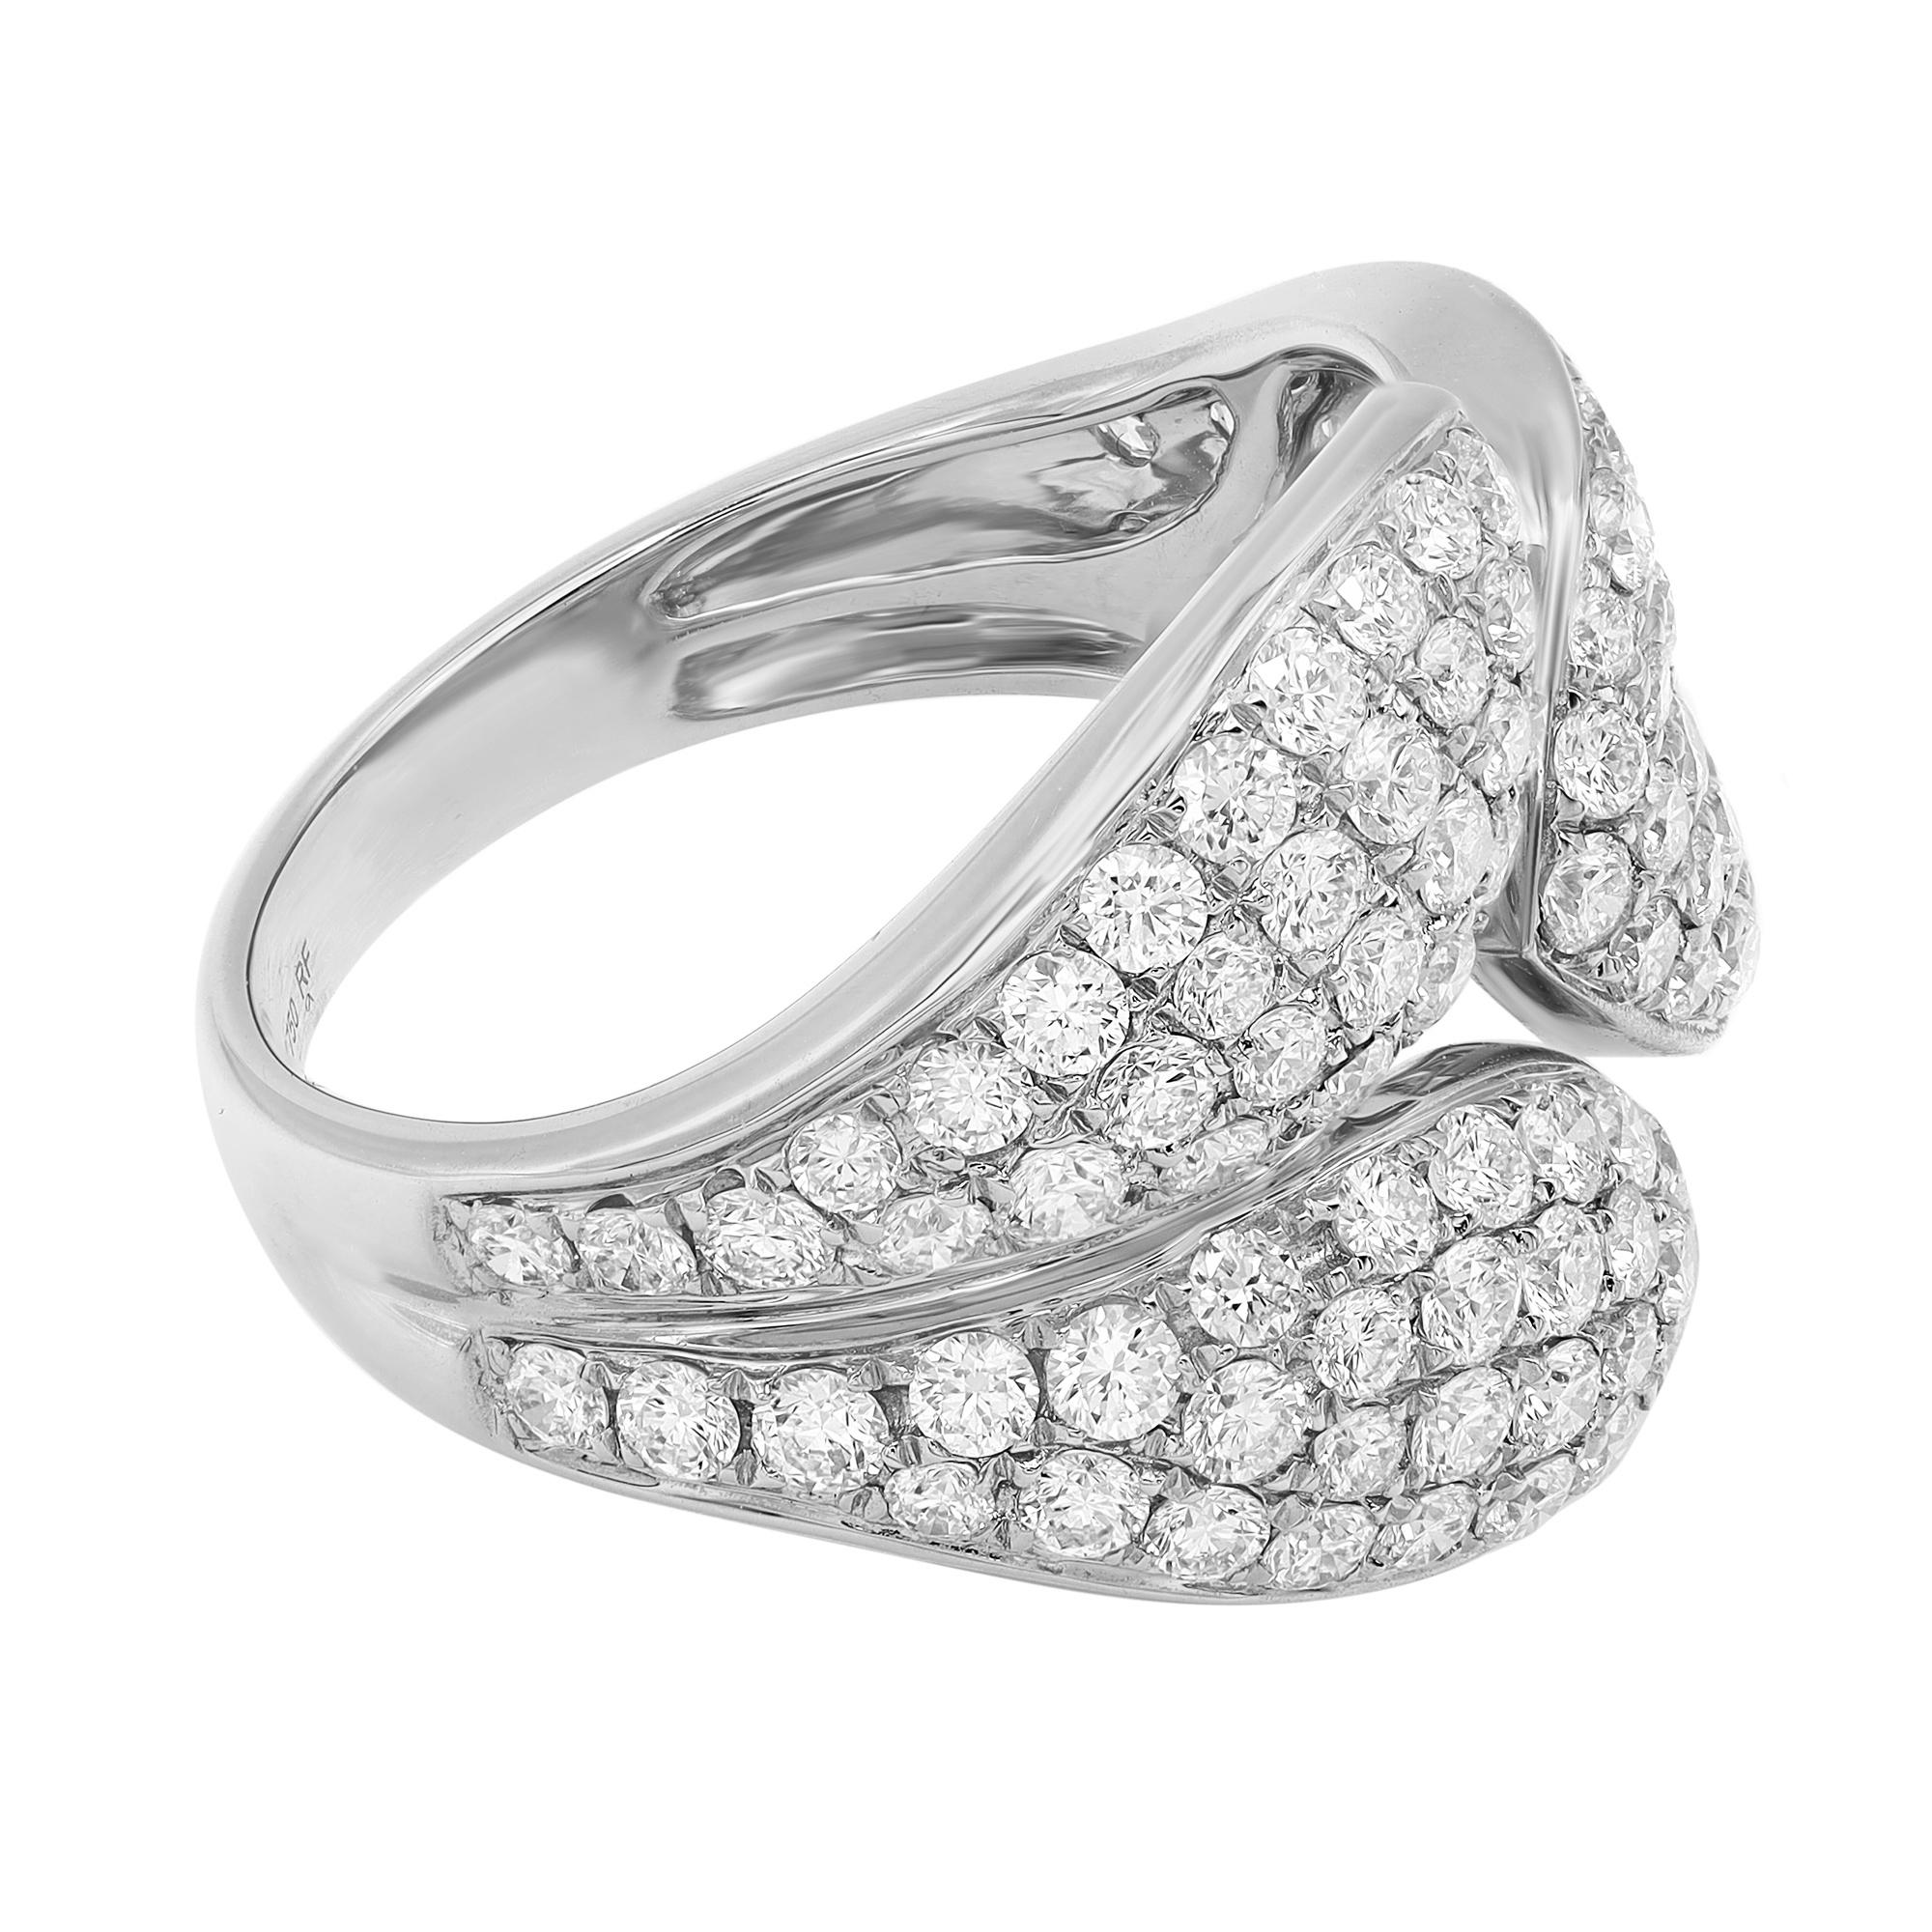 This luxurious 18k white gold ladies diamond ring showcases 2.00 carats of dazzling round cut diamonds in pave setting. Perfectly encrusted in a lustrous yellow gold leaves shank. Diamond Quality: G-H color, VS-SI clarity. Ring Size: 6.5. Total